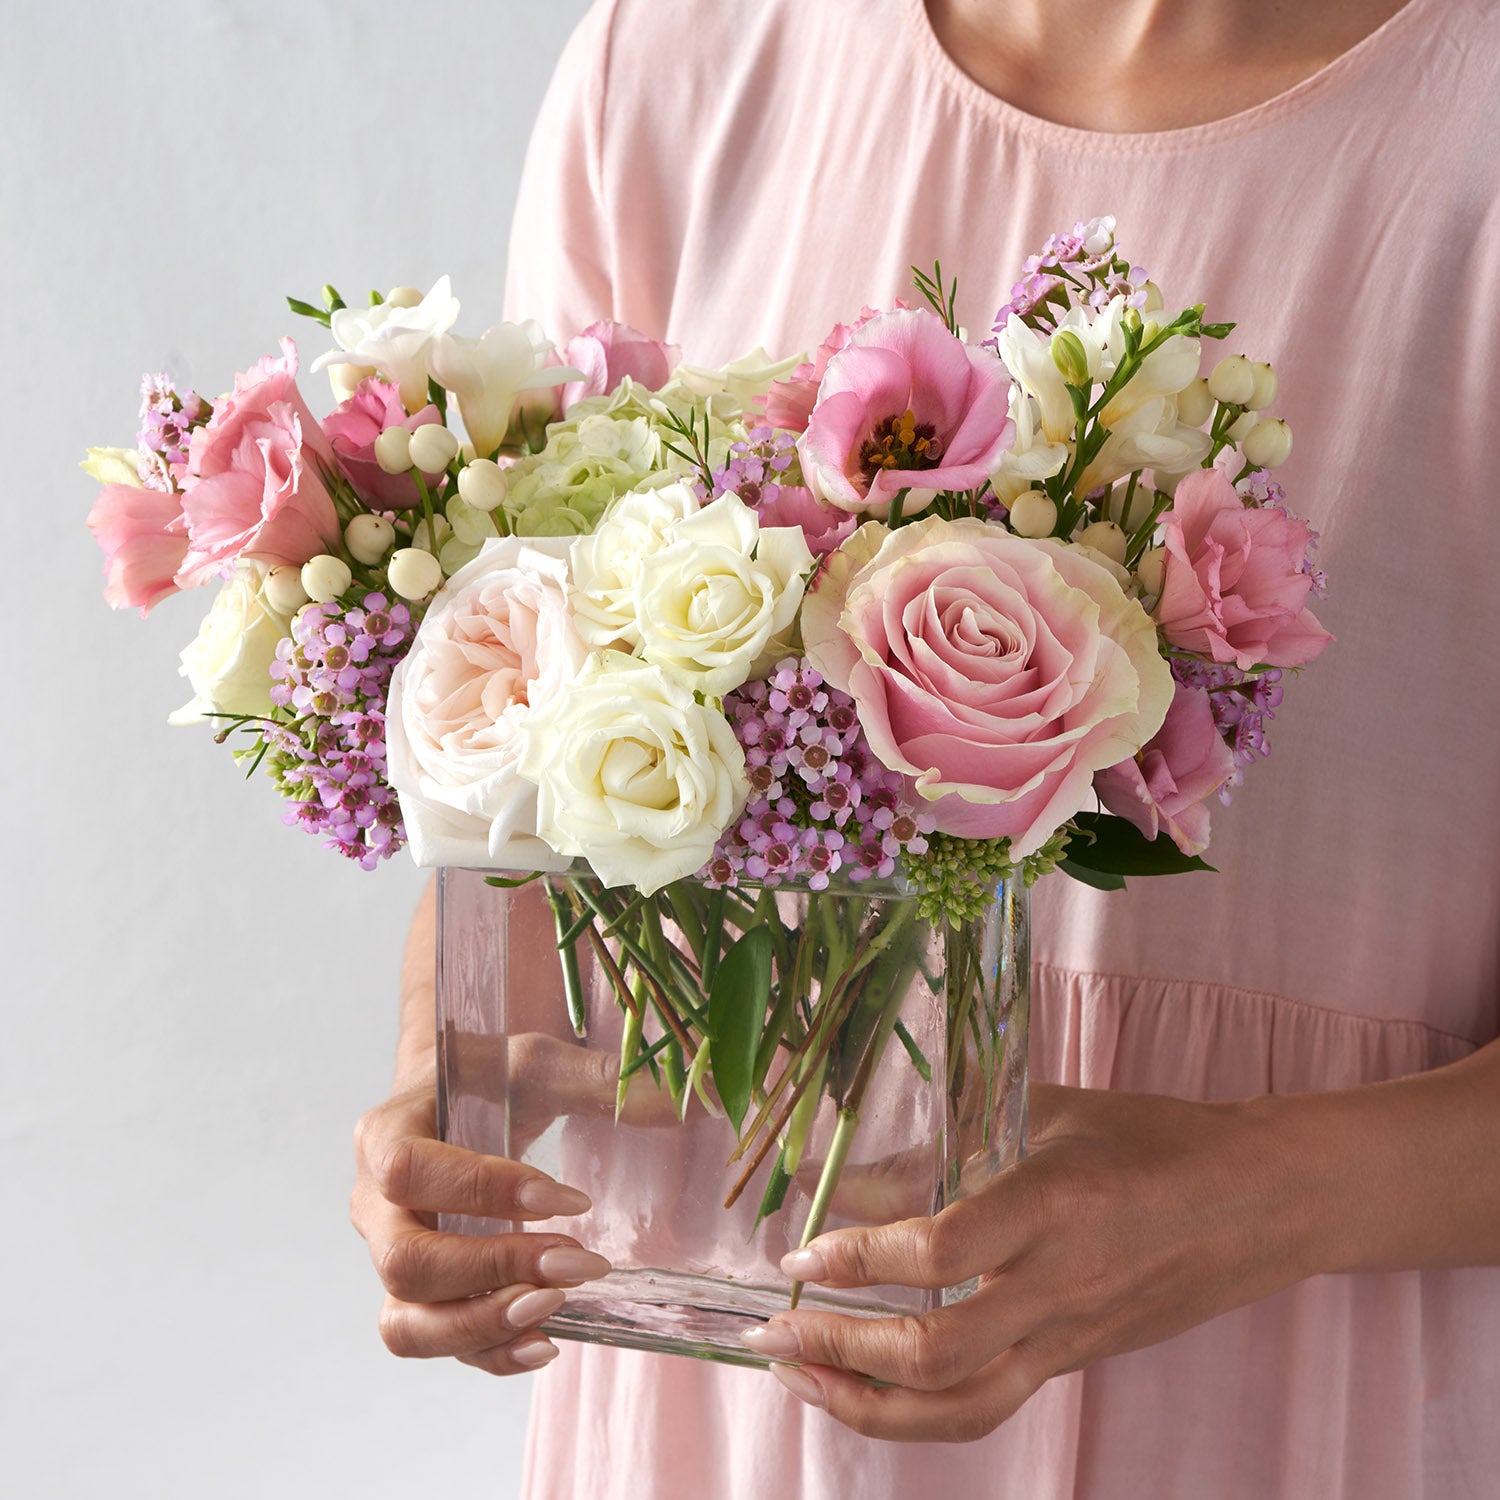 Woman in pink dress holding clearglass vase ful of variouse pink and white flowers.